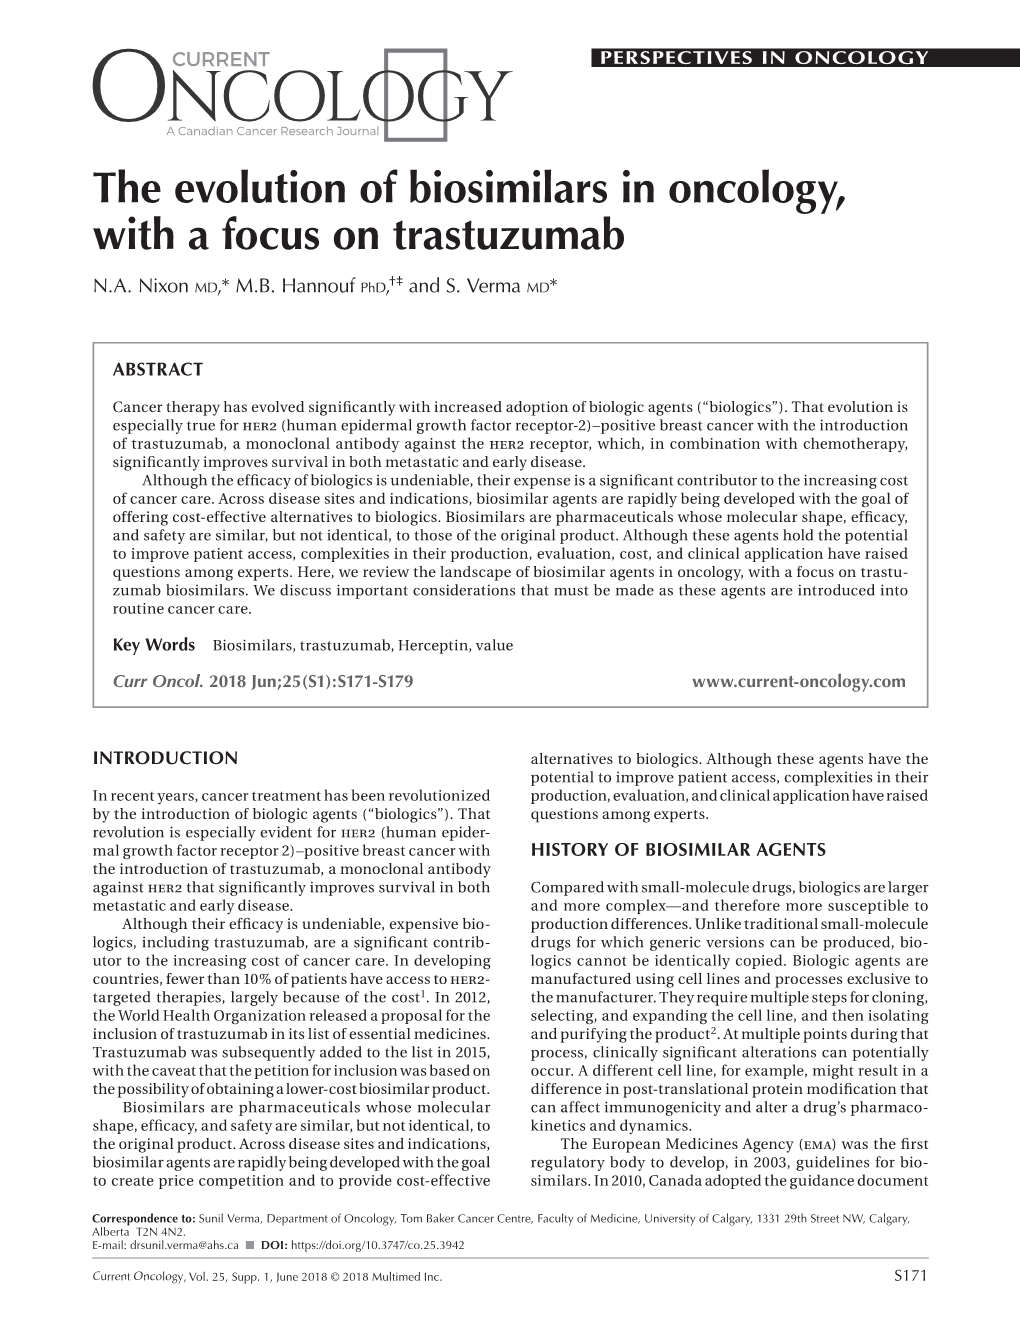 The Evolution of Biosimilars in Oncology, with a Focus on Trastuzumab